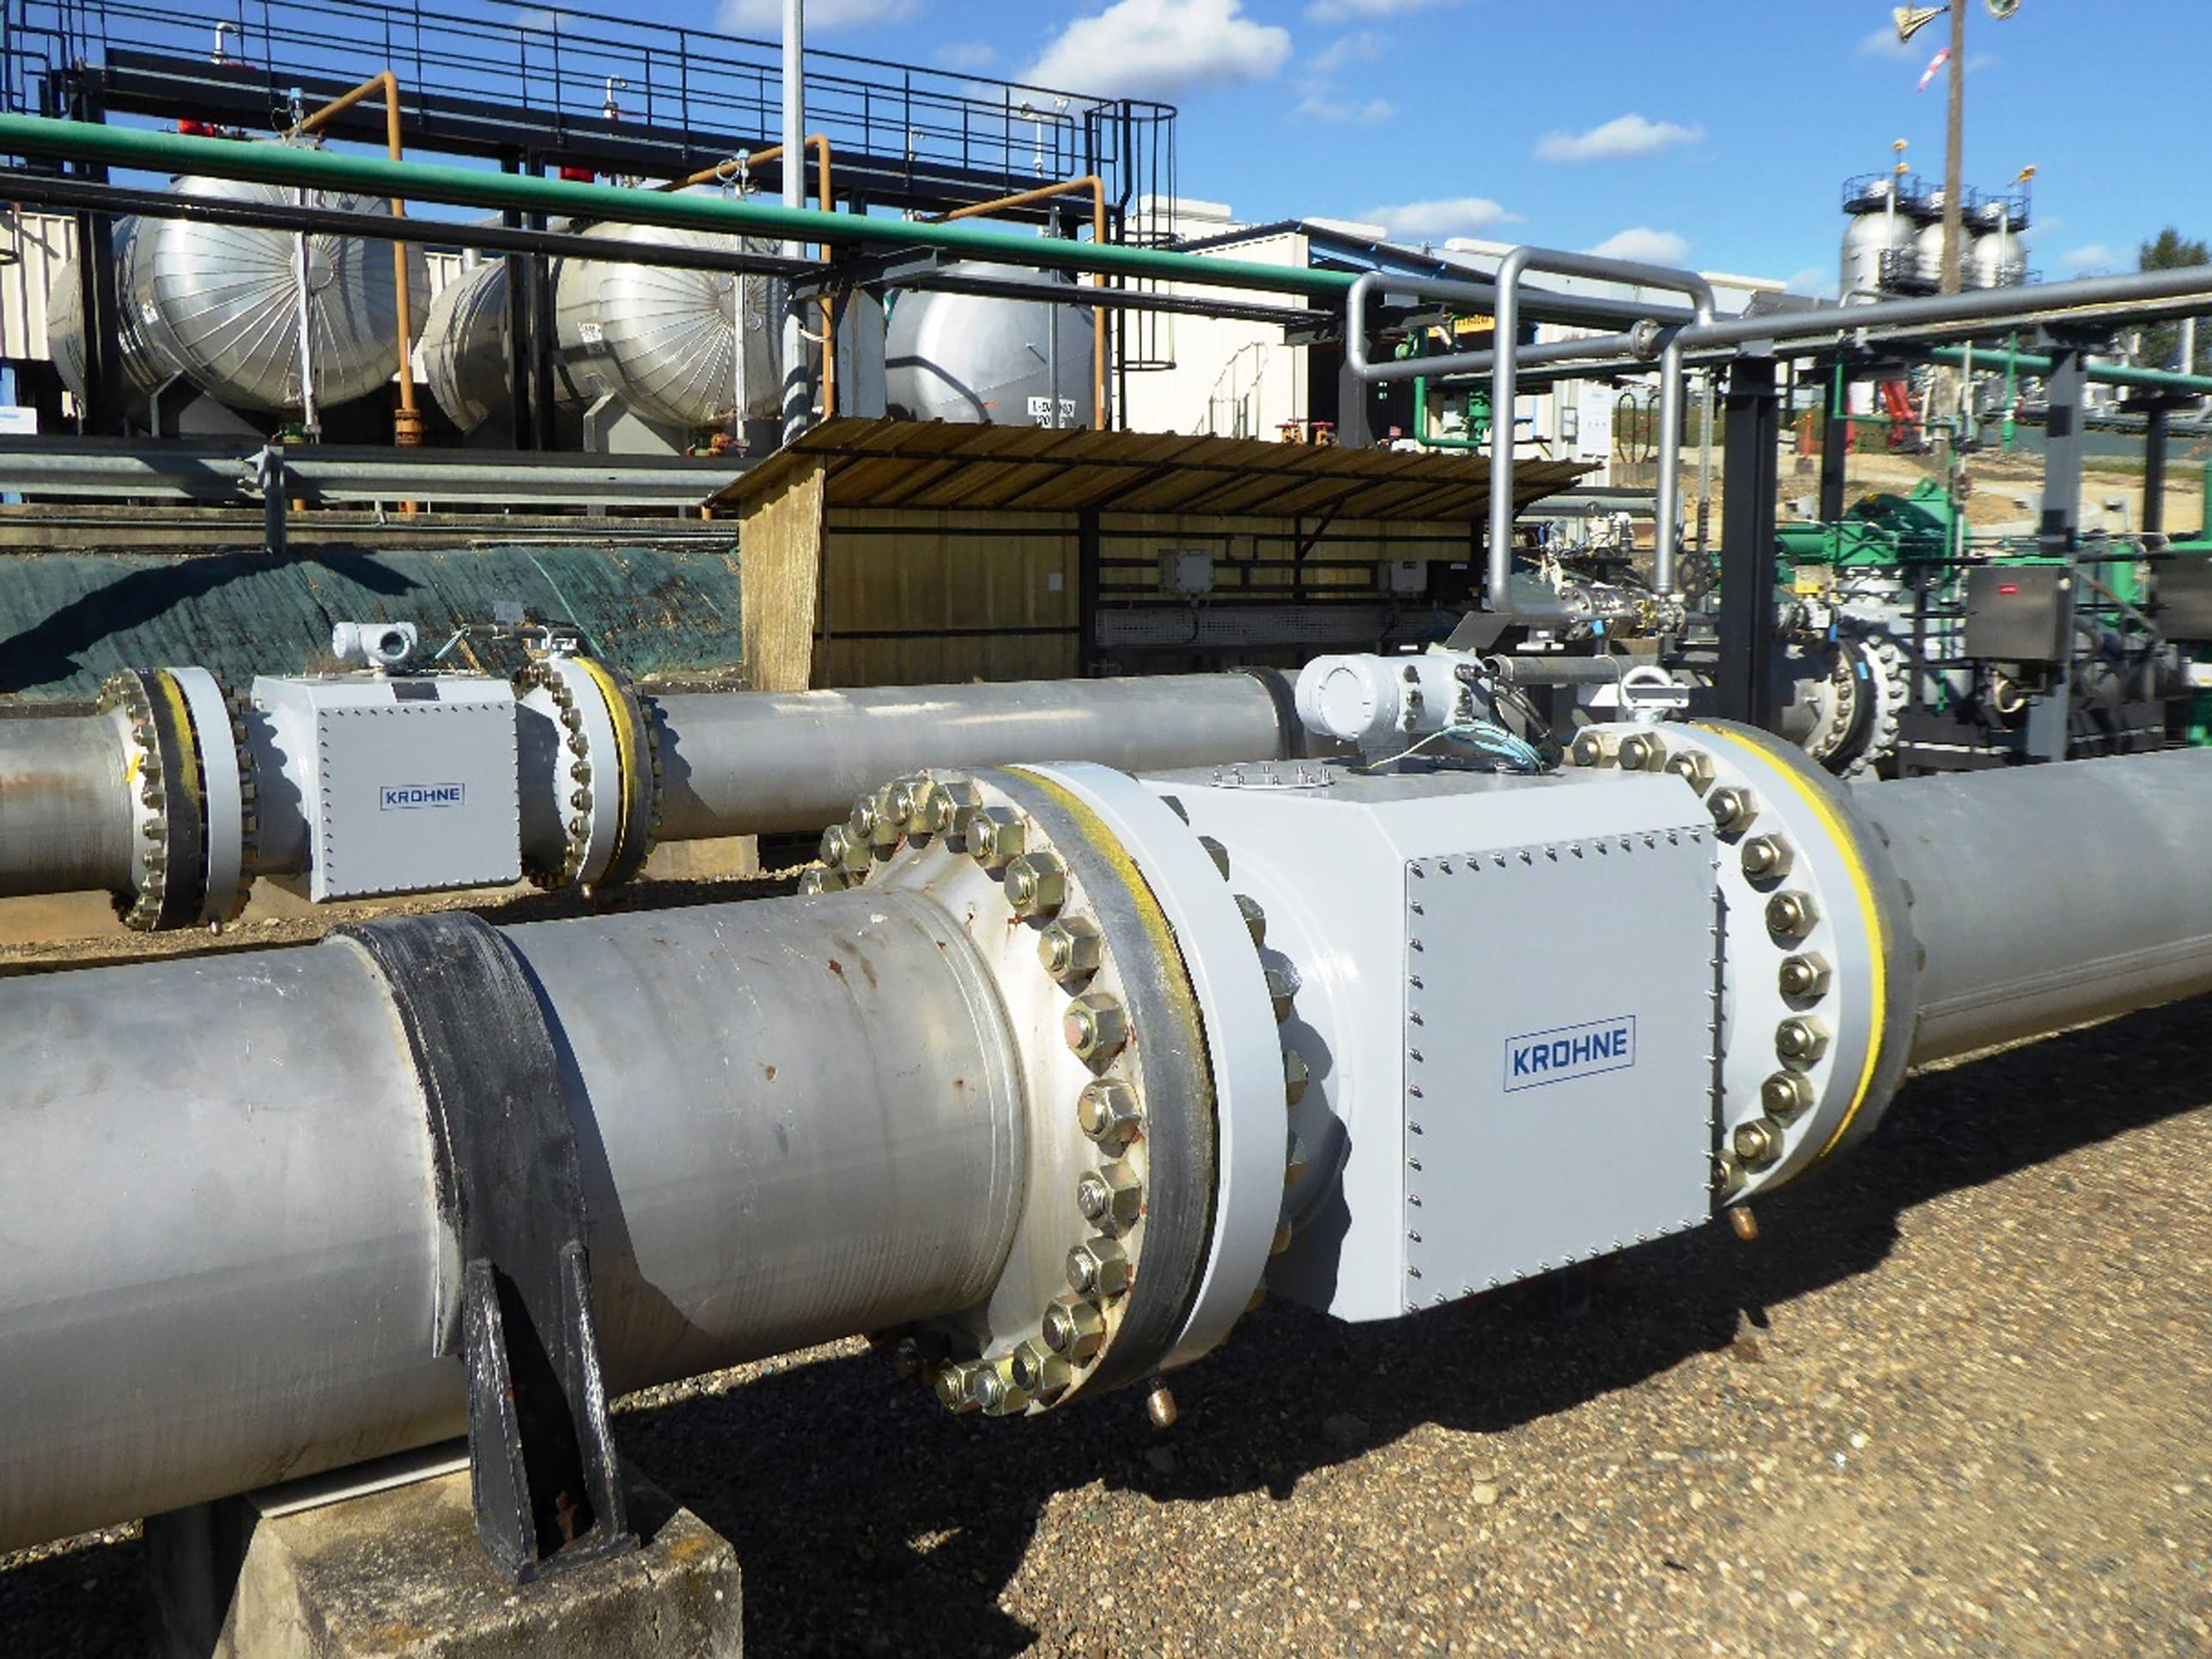 Ultrasonic flow measurement for the internal monitoring of natural gas quantities